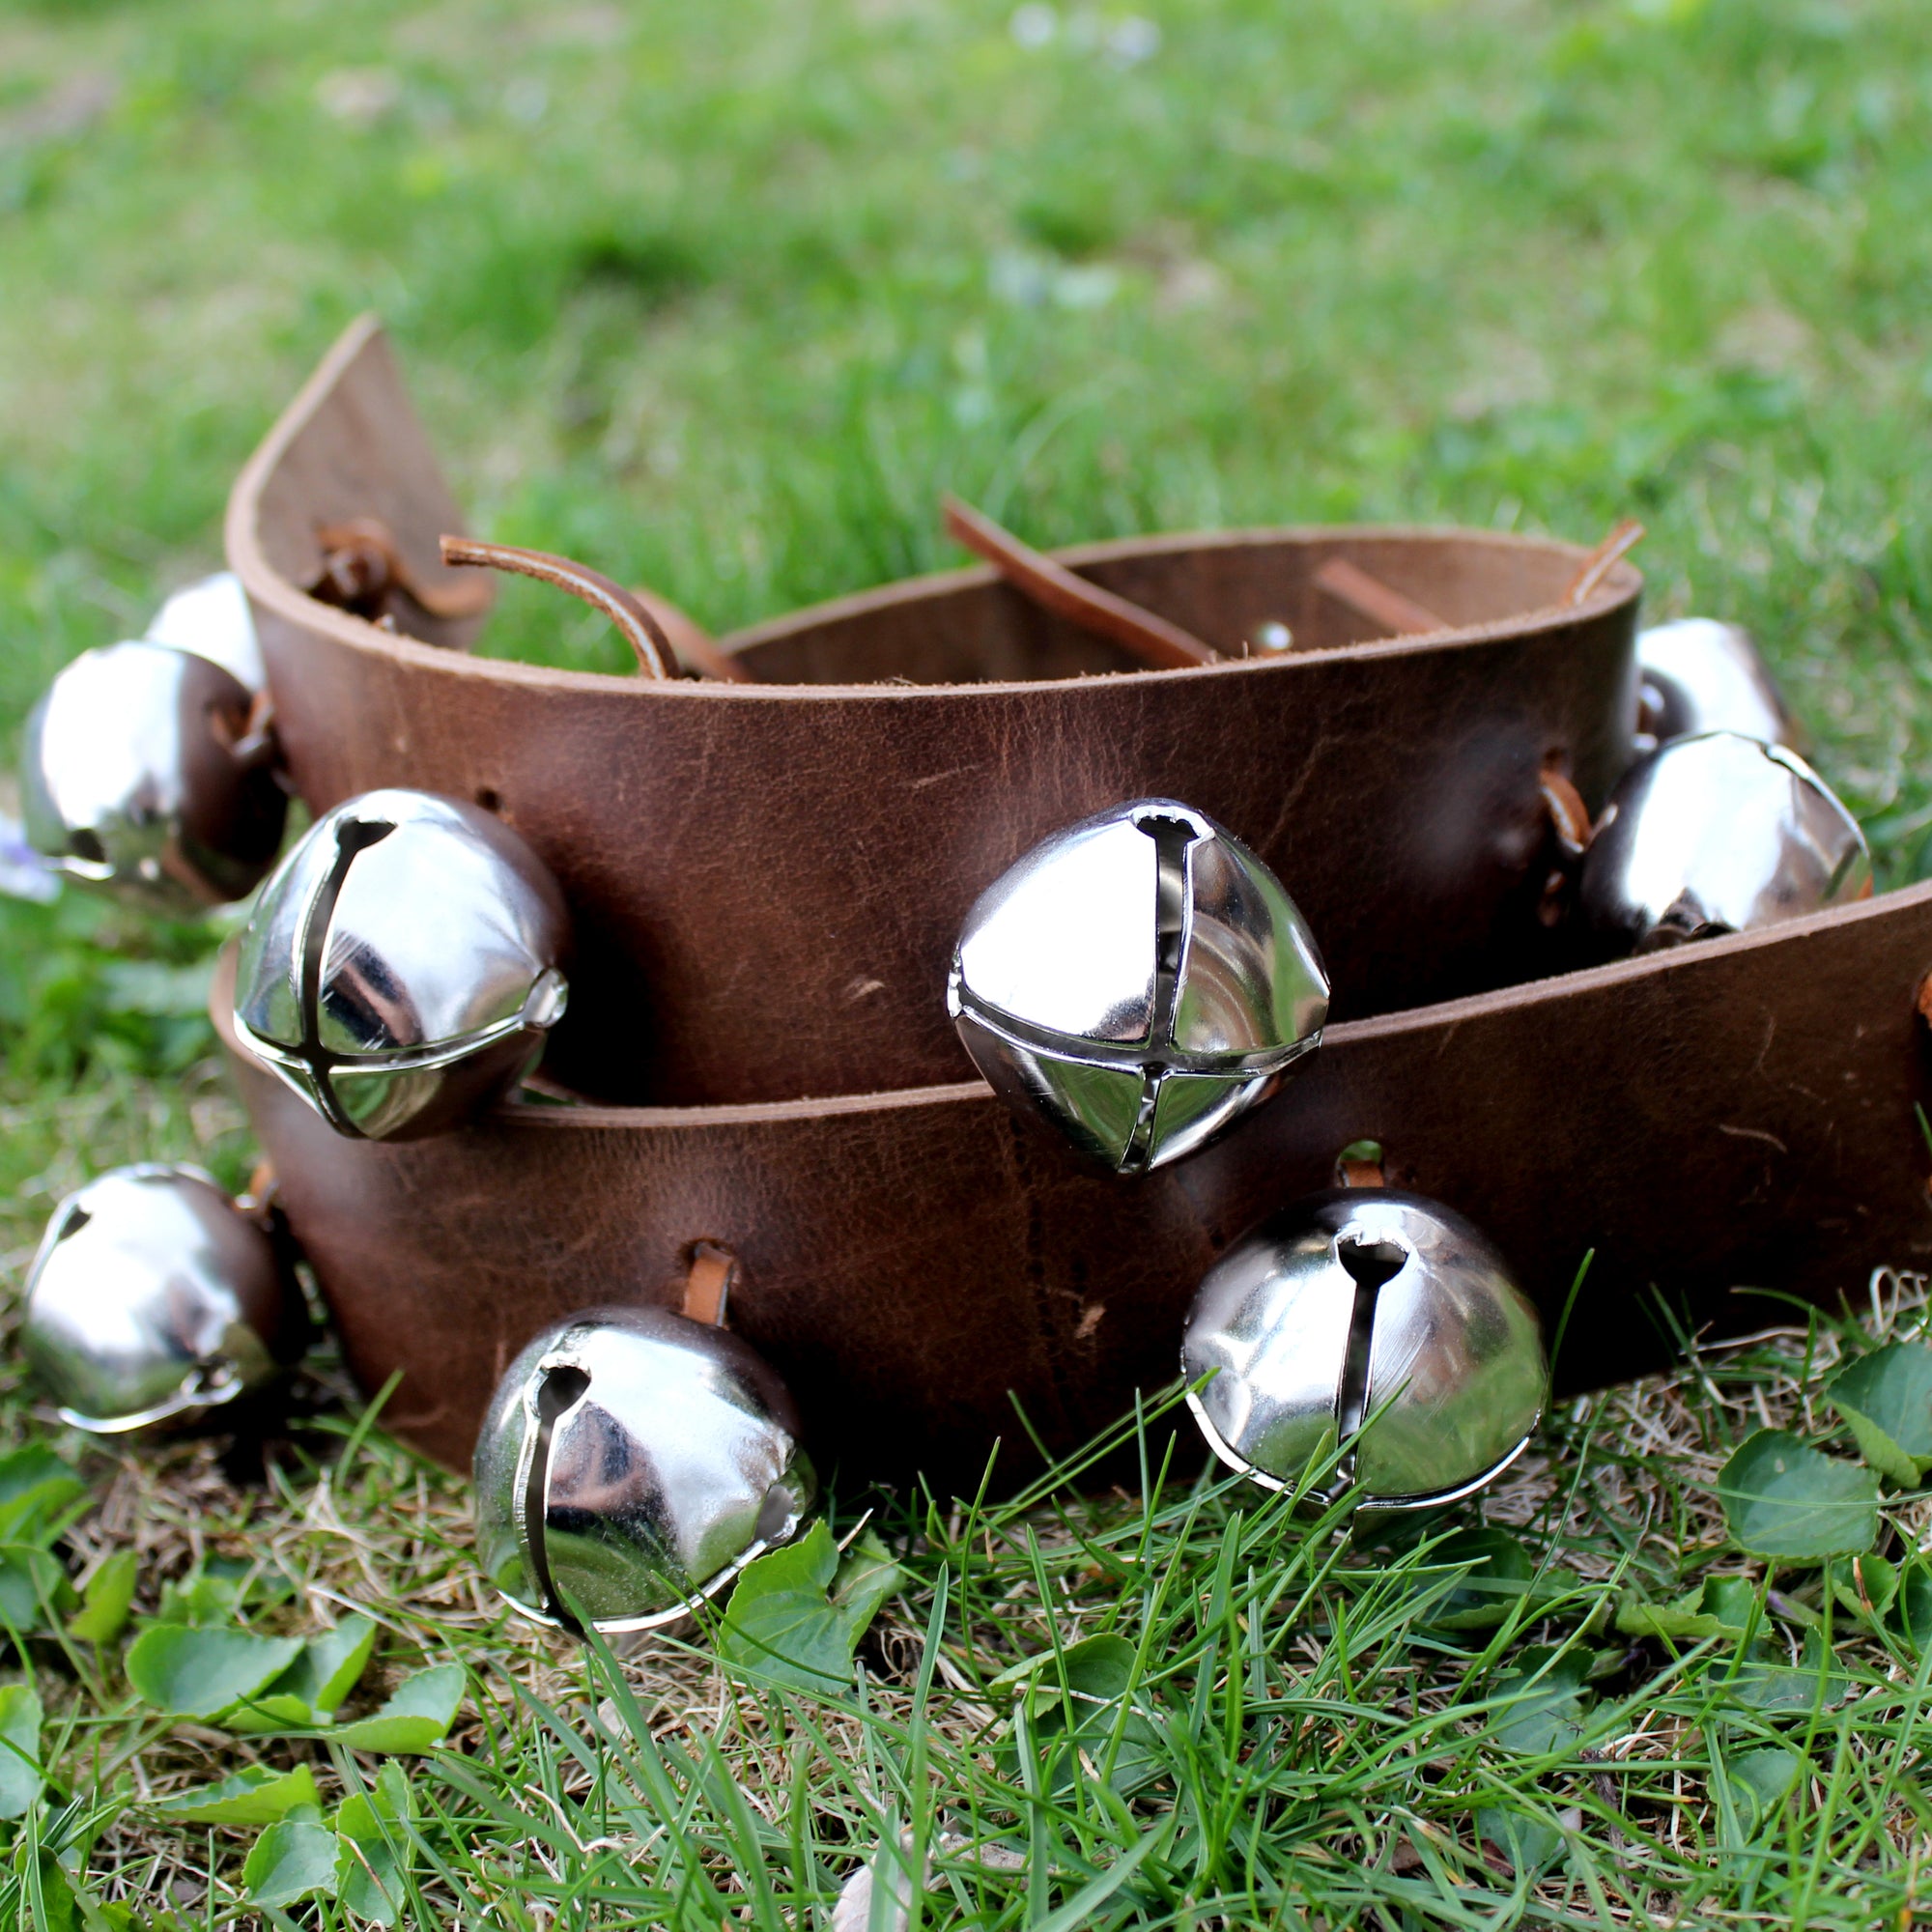 Leather strap with jingle bells coiled on the grass.